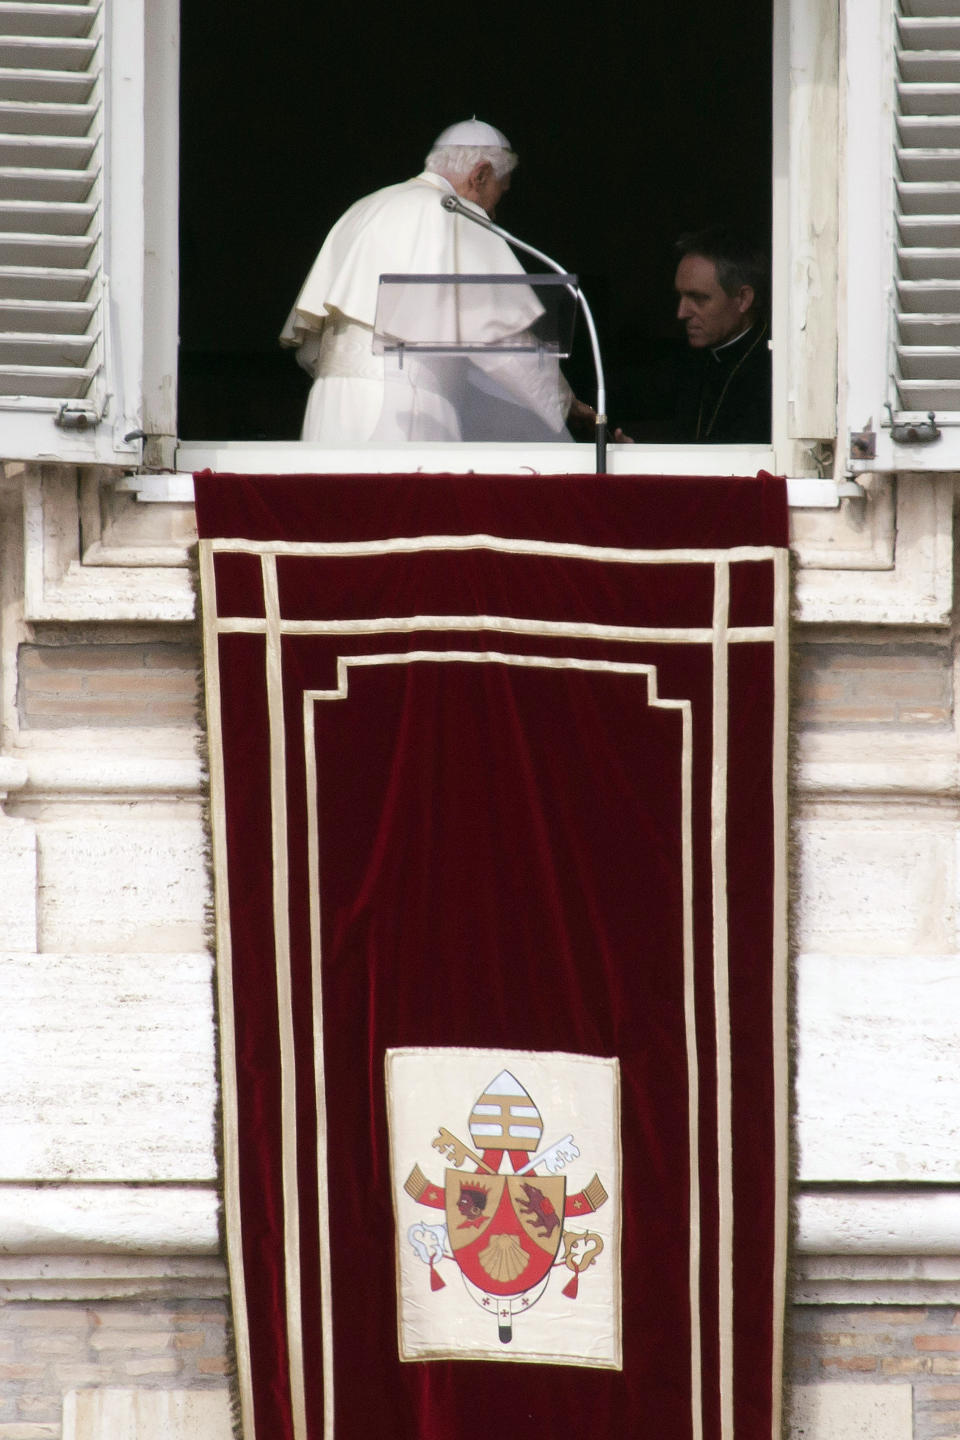 FILE - Pope Benedict XVI, flanked by his personal secretary Archbishop Georg Gaenswein, as he turns away from a window overlooking St. Peter's Square after delivering his last Angelus noon prayer, at the Vatican, on Feb. 24, 2013. He was the reluctant pope, a shy bookworm who preferred solitary walks in the Alps and Mozart piano concertos to the public glare and majesty of Vatican pageantry. When Cardinal Joseph Ratzinger became Pope Benedict XVI and was thrust into the footsteps of his beloved and charismatic predecessor, he said he felt a guillotine had come down on him. The Vatican announced Saturday Dec. 31, 2022 that Benedict, the former Joseph Ratzinger, had died at age 95. (AP Photo/Andrew Medichini, File)